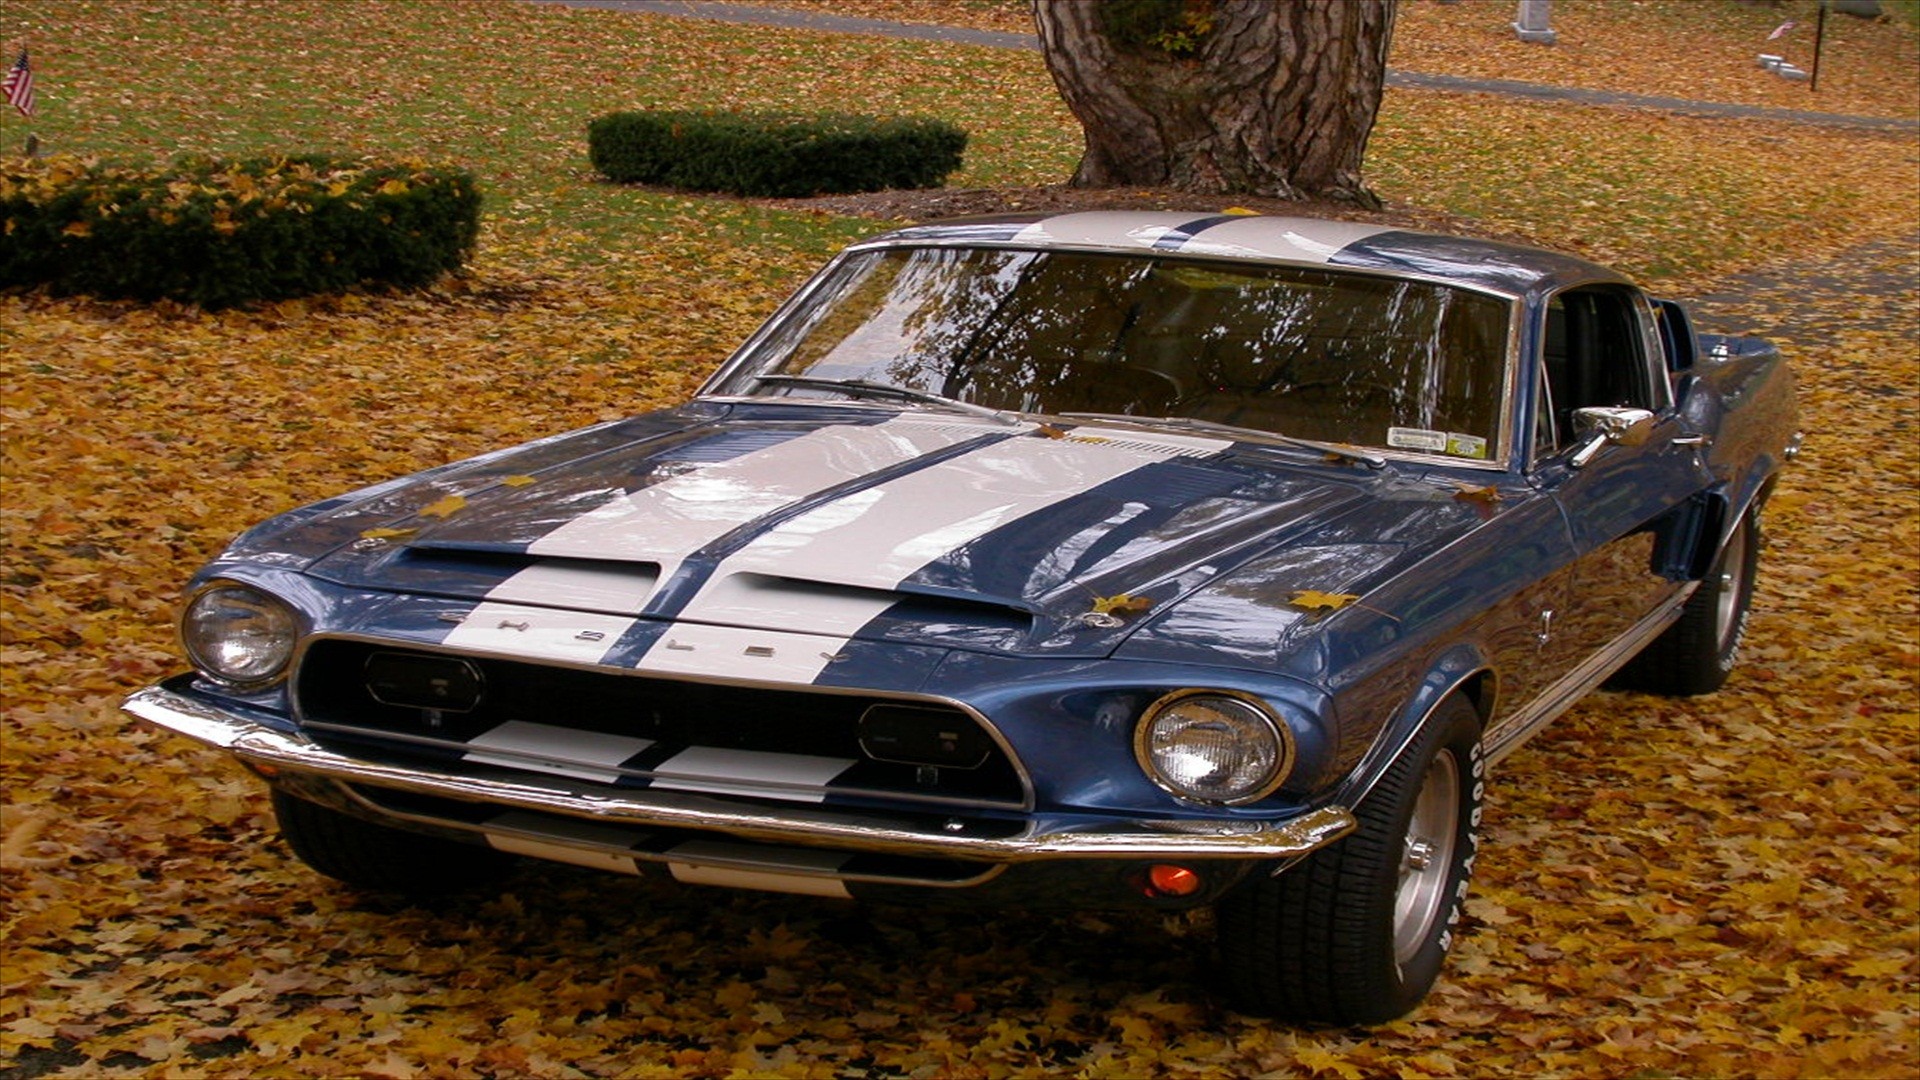 General 1920x1080 Shelby car blue cars vehicle Ford Ford Mustang muscle cars American cars racing stripes